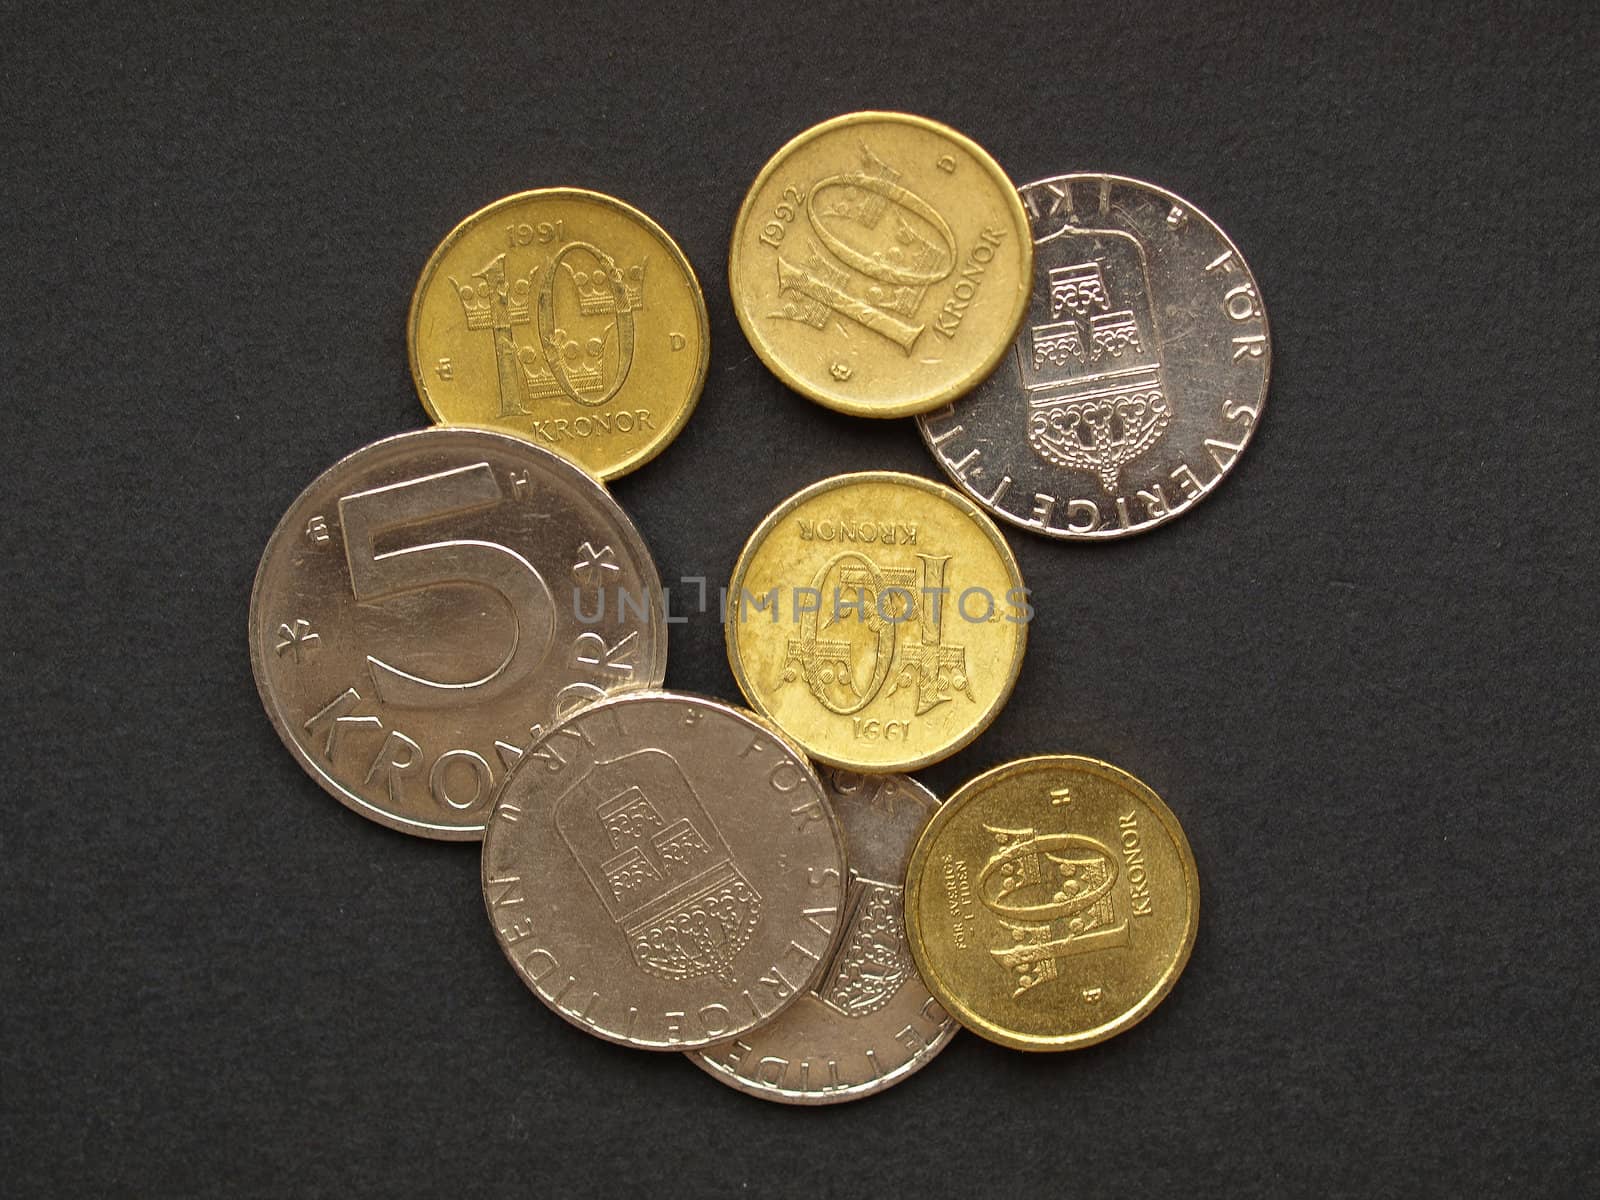 Swedish coins by paolo77